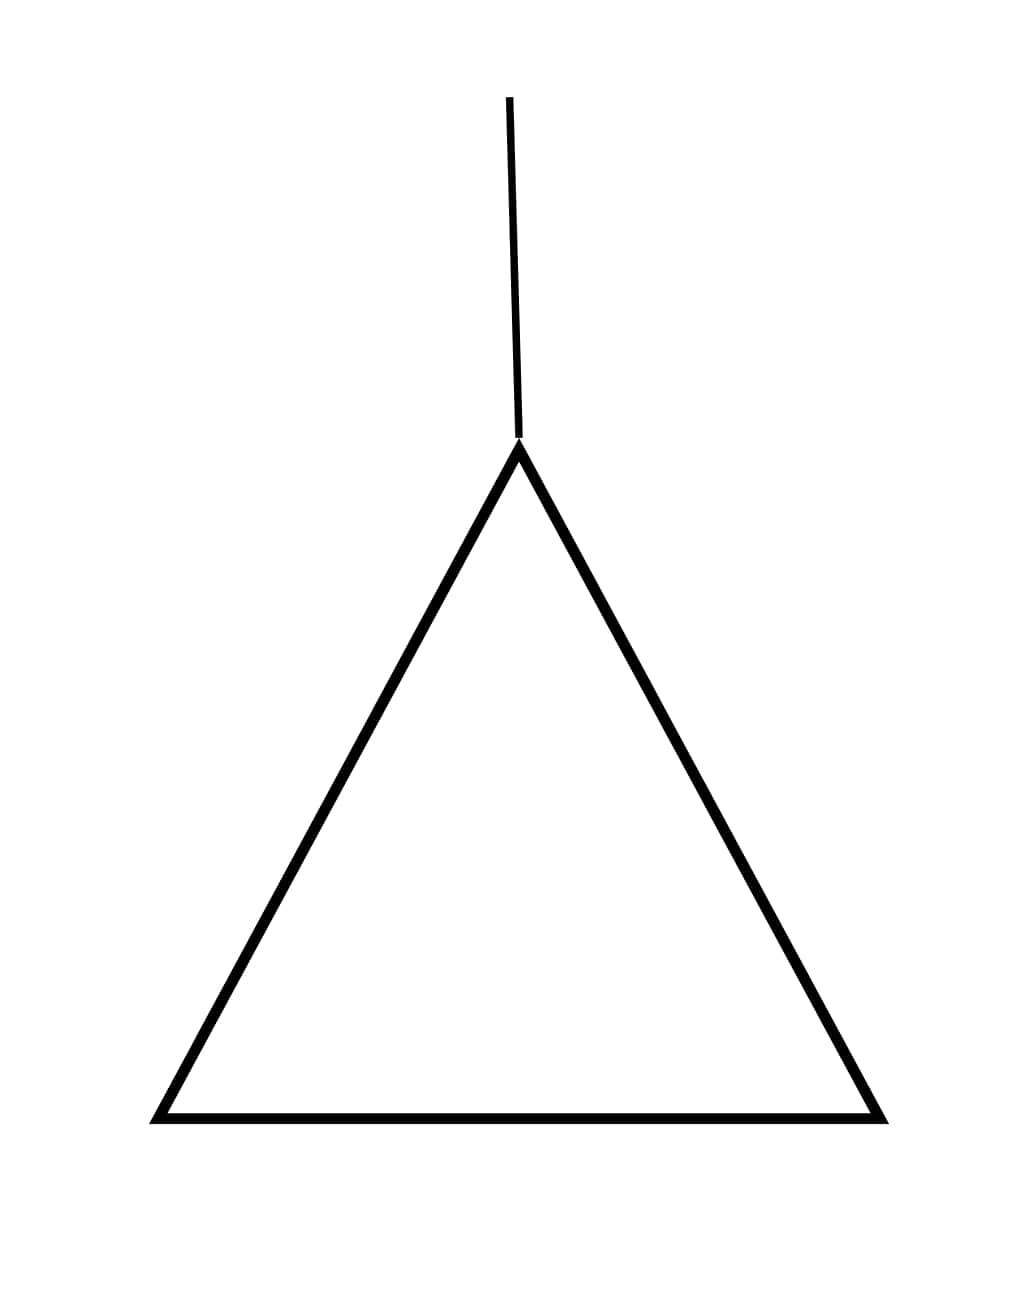 Transfer In (Triangle Pointing Right)